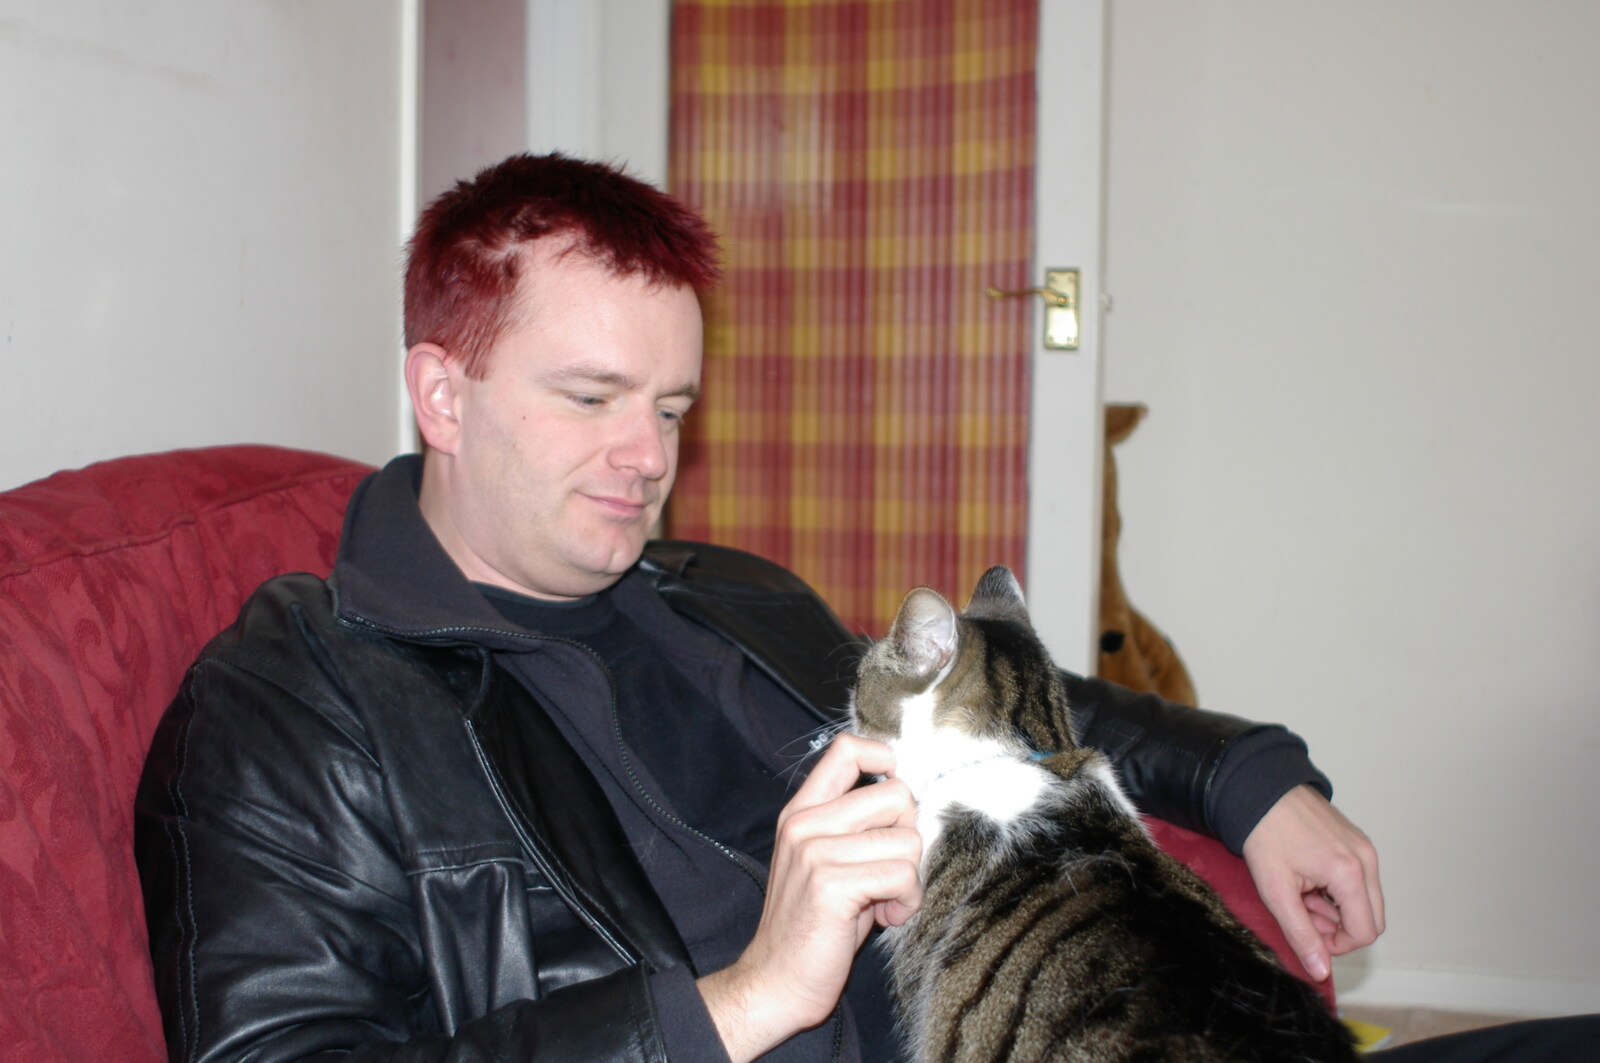 A Walk Around Lymington, and Luke Leaves Qualcomm Cambridge - 13th March 2005: Nosher and Holly, the cat